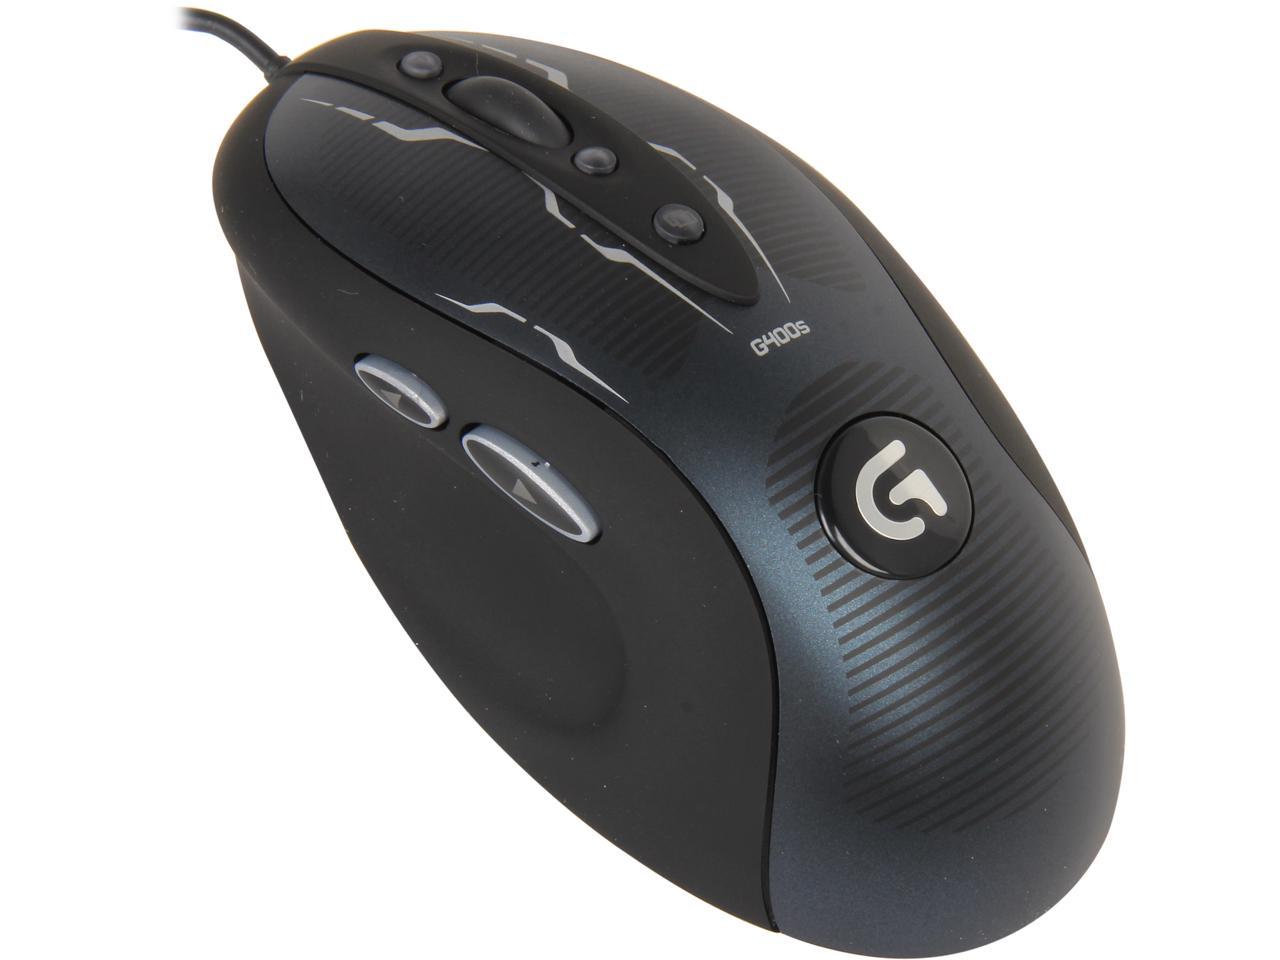 temperament New meaning opener Logitech G400s 910-003589 Black Wired Optical Gaming Mouse - Newegg.com